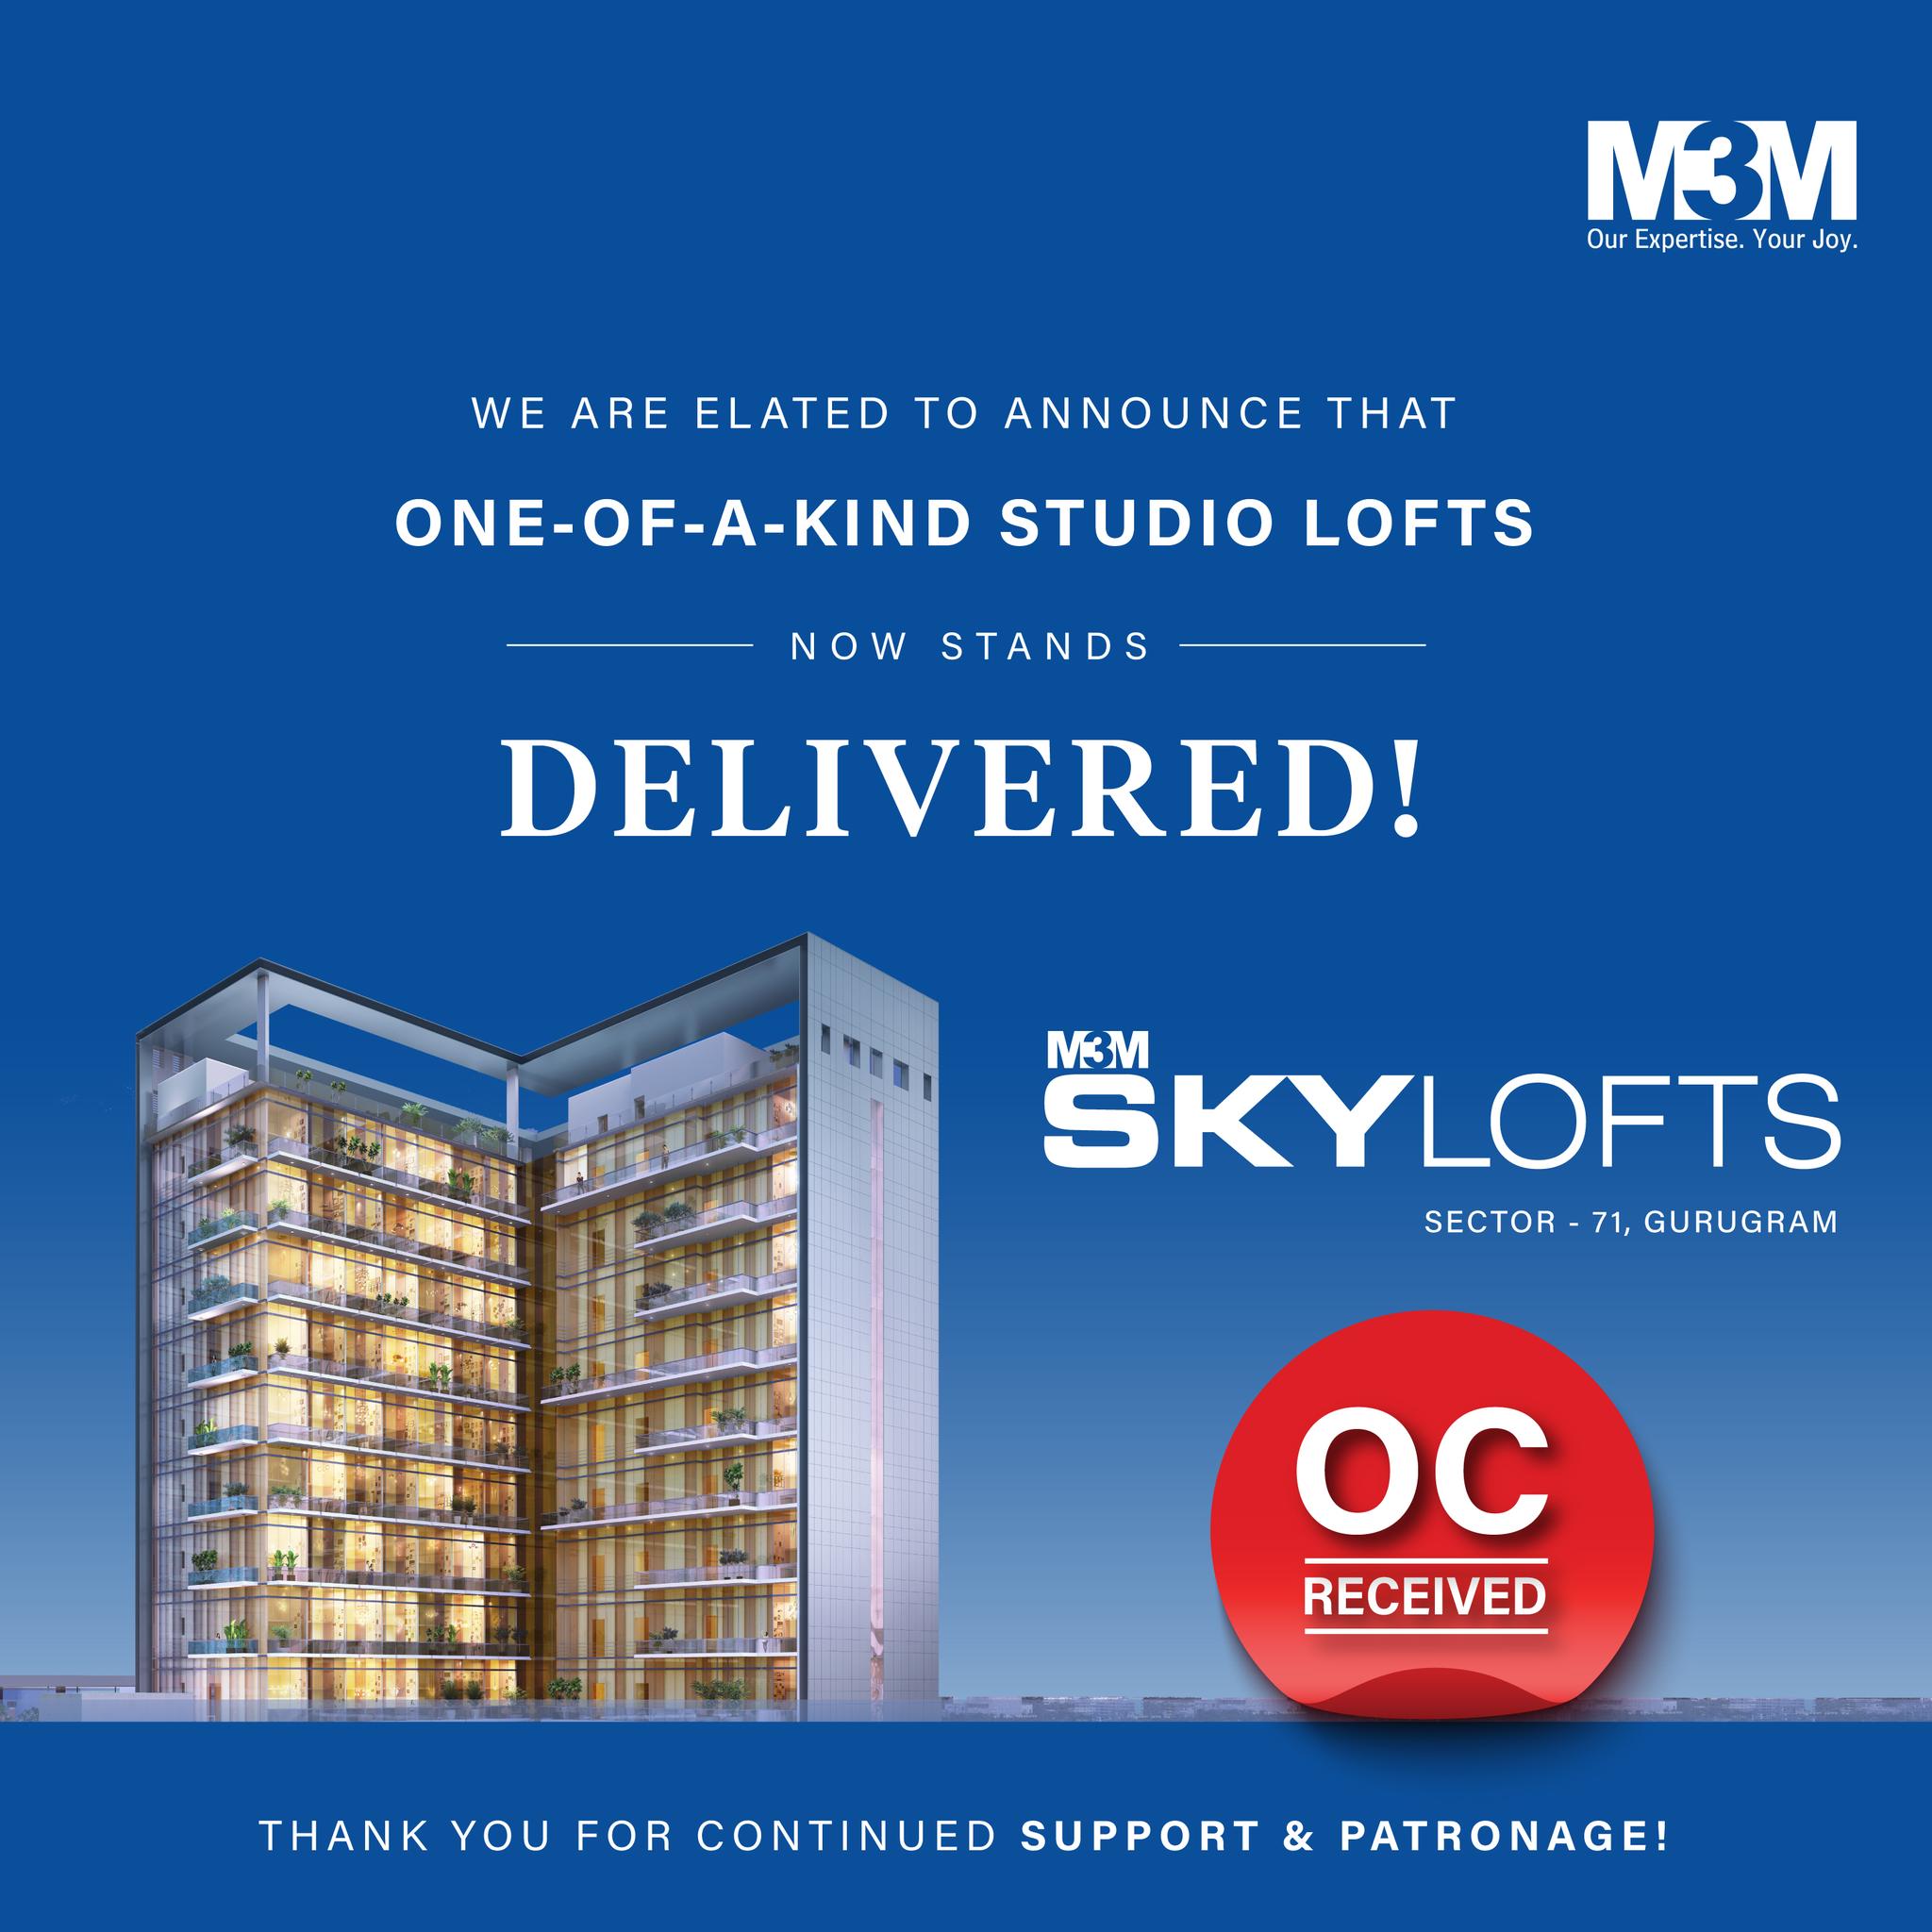 We are elated to announce that one-of-a-kind studio lofts now stands  delivered at M3M Sky Lofts, Gurgaon Update